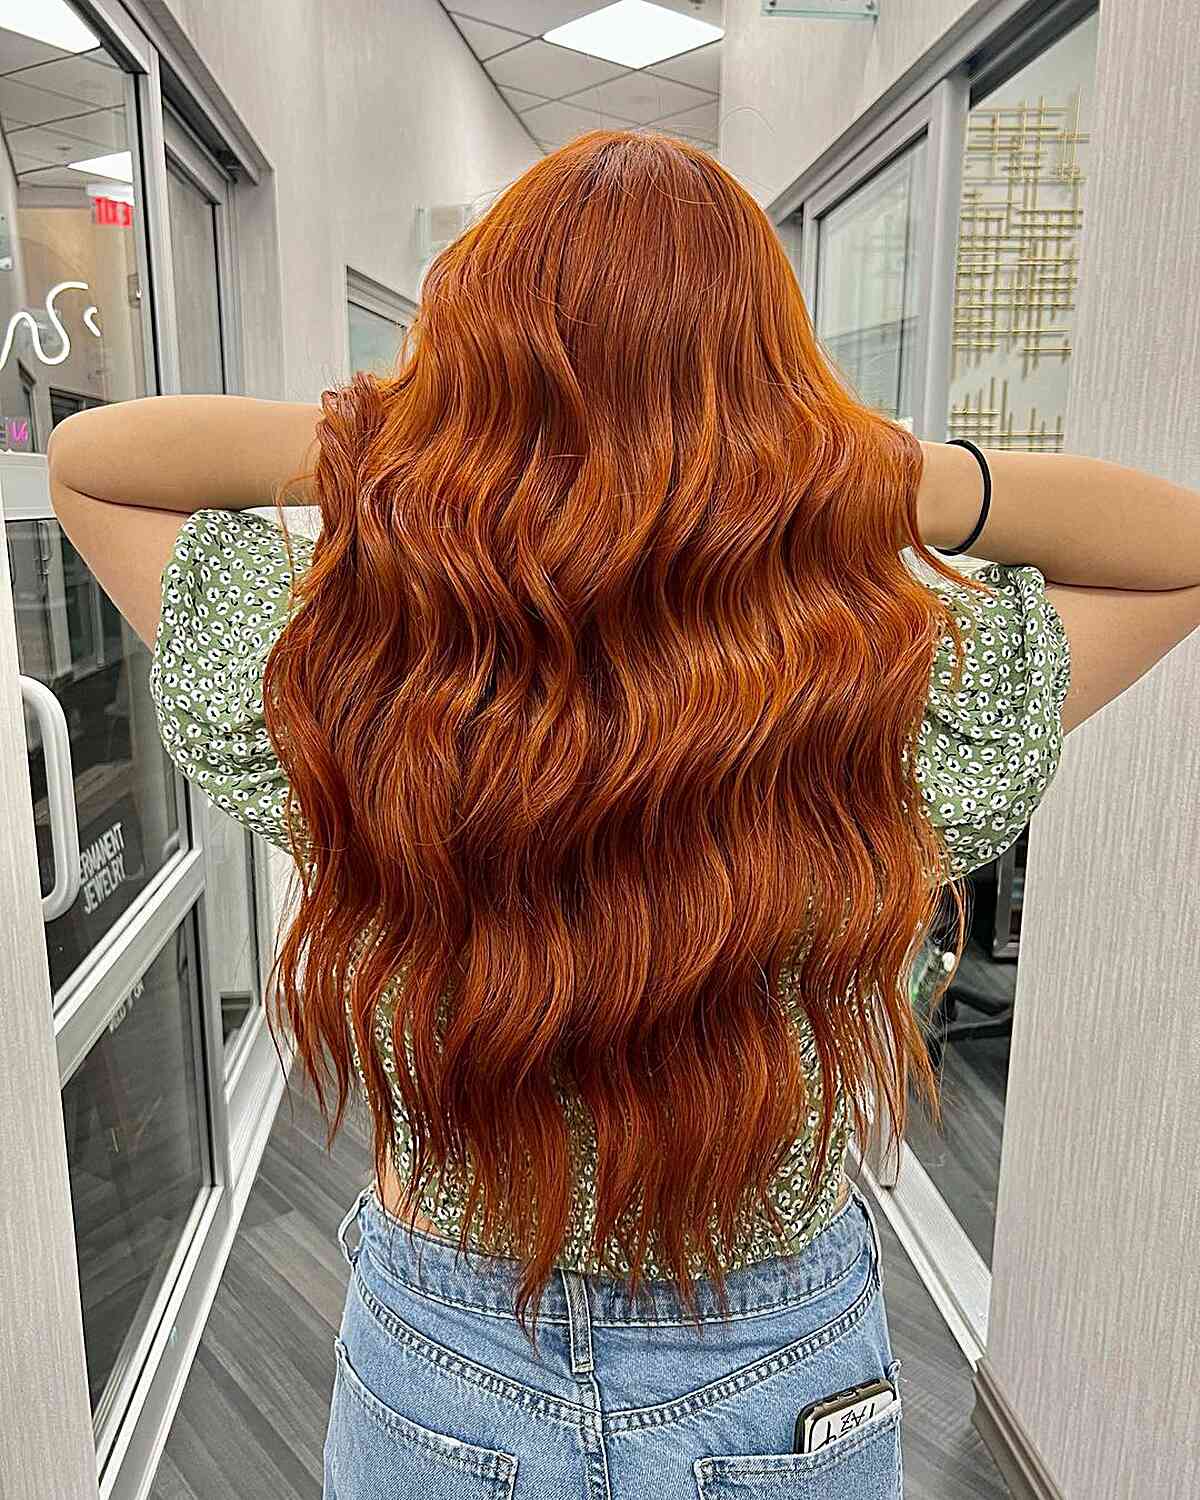 Long Red Hair Extensions for ladies with naturally red hair